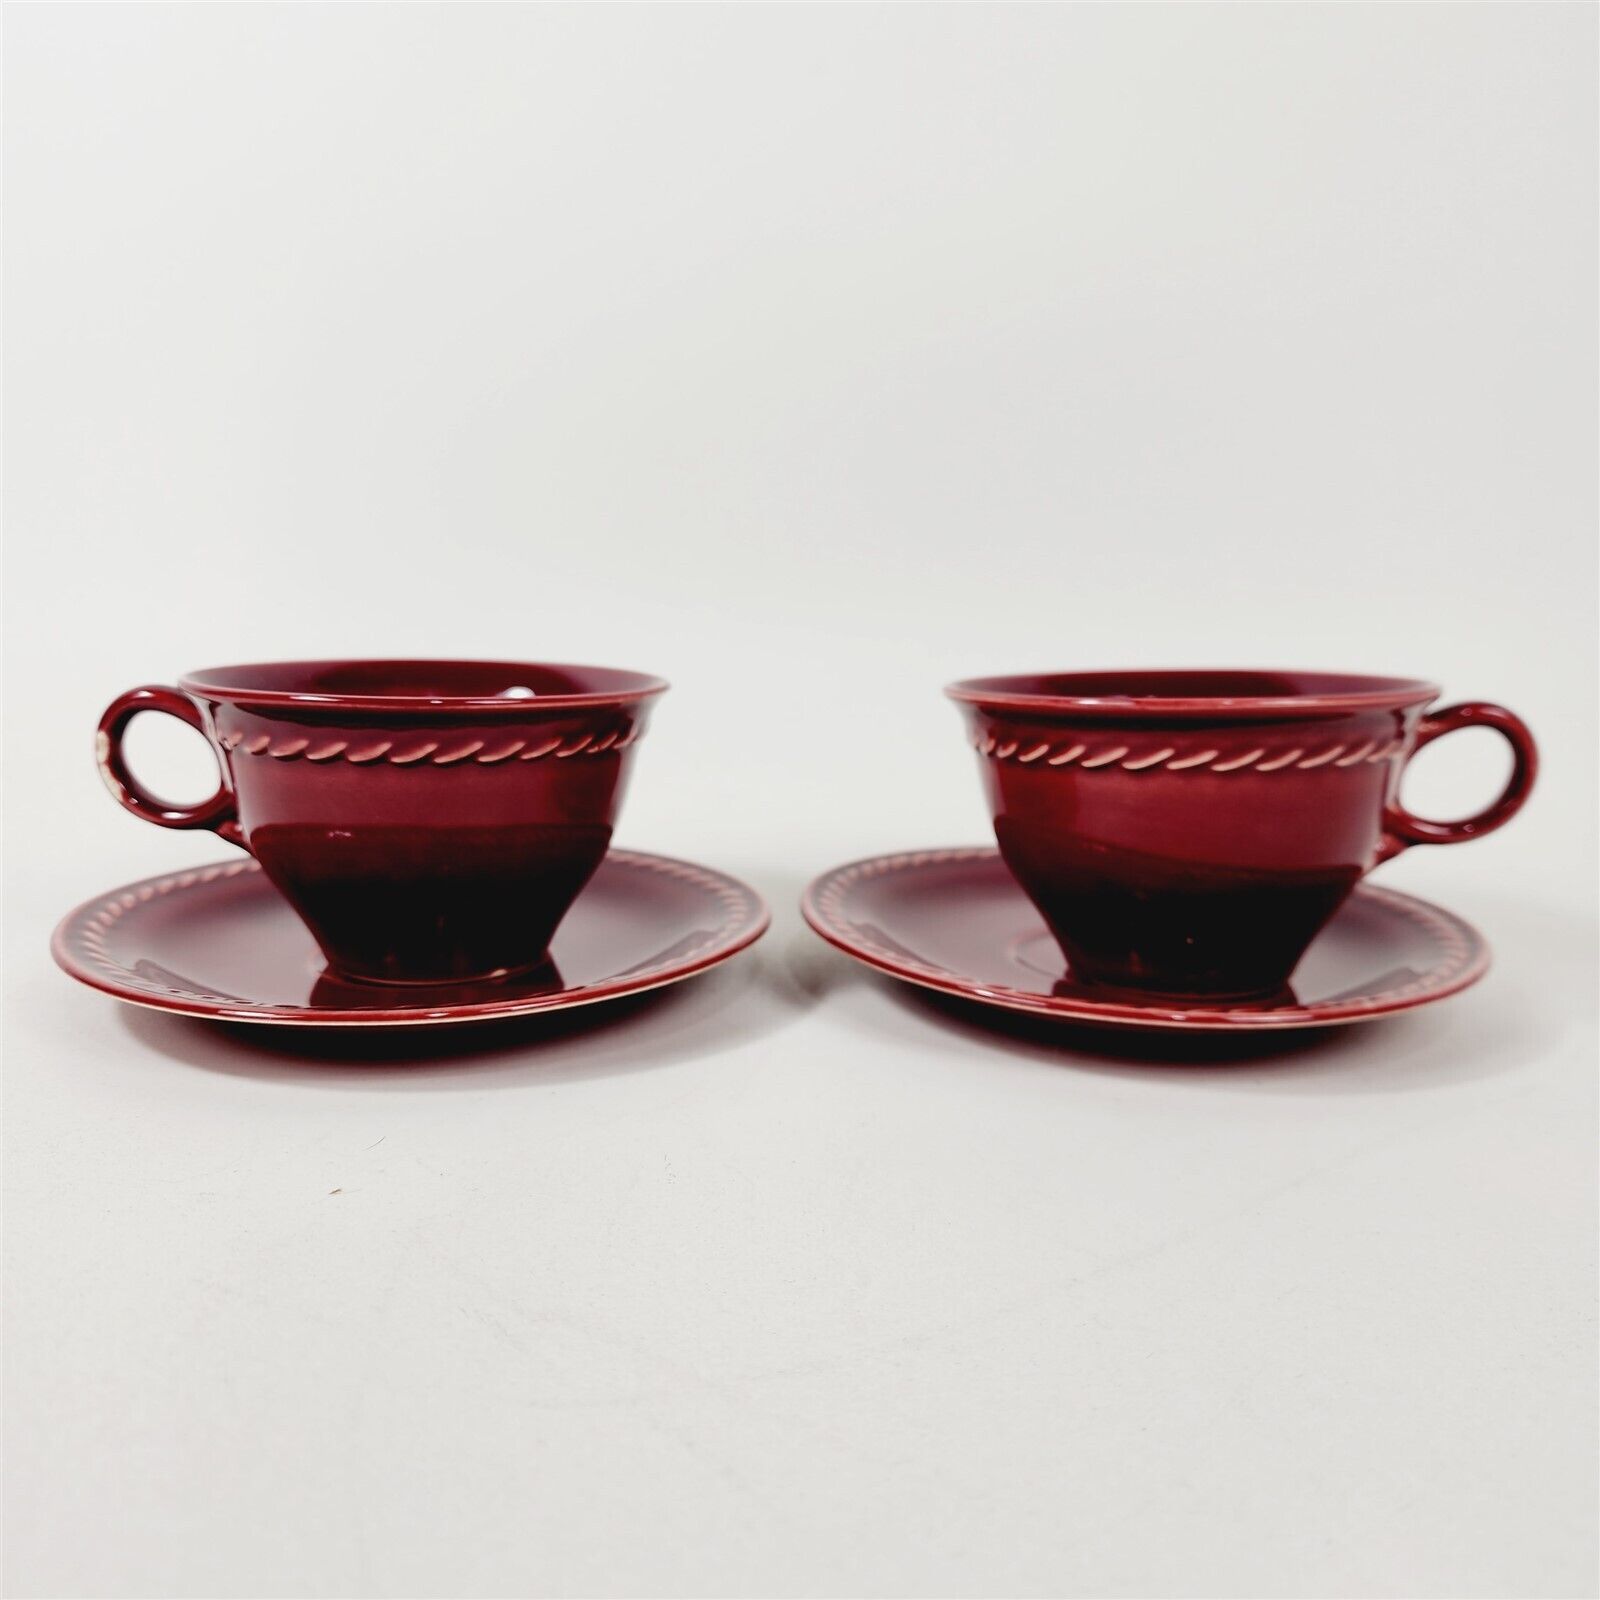 2 Vintage Rodeo by Universal Rop Teacup & Saucer Sets Red Rope Pattern